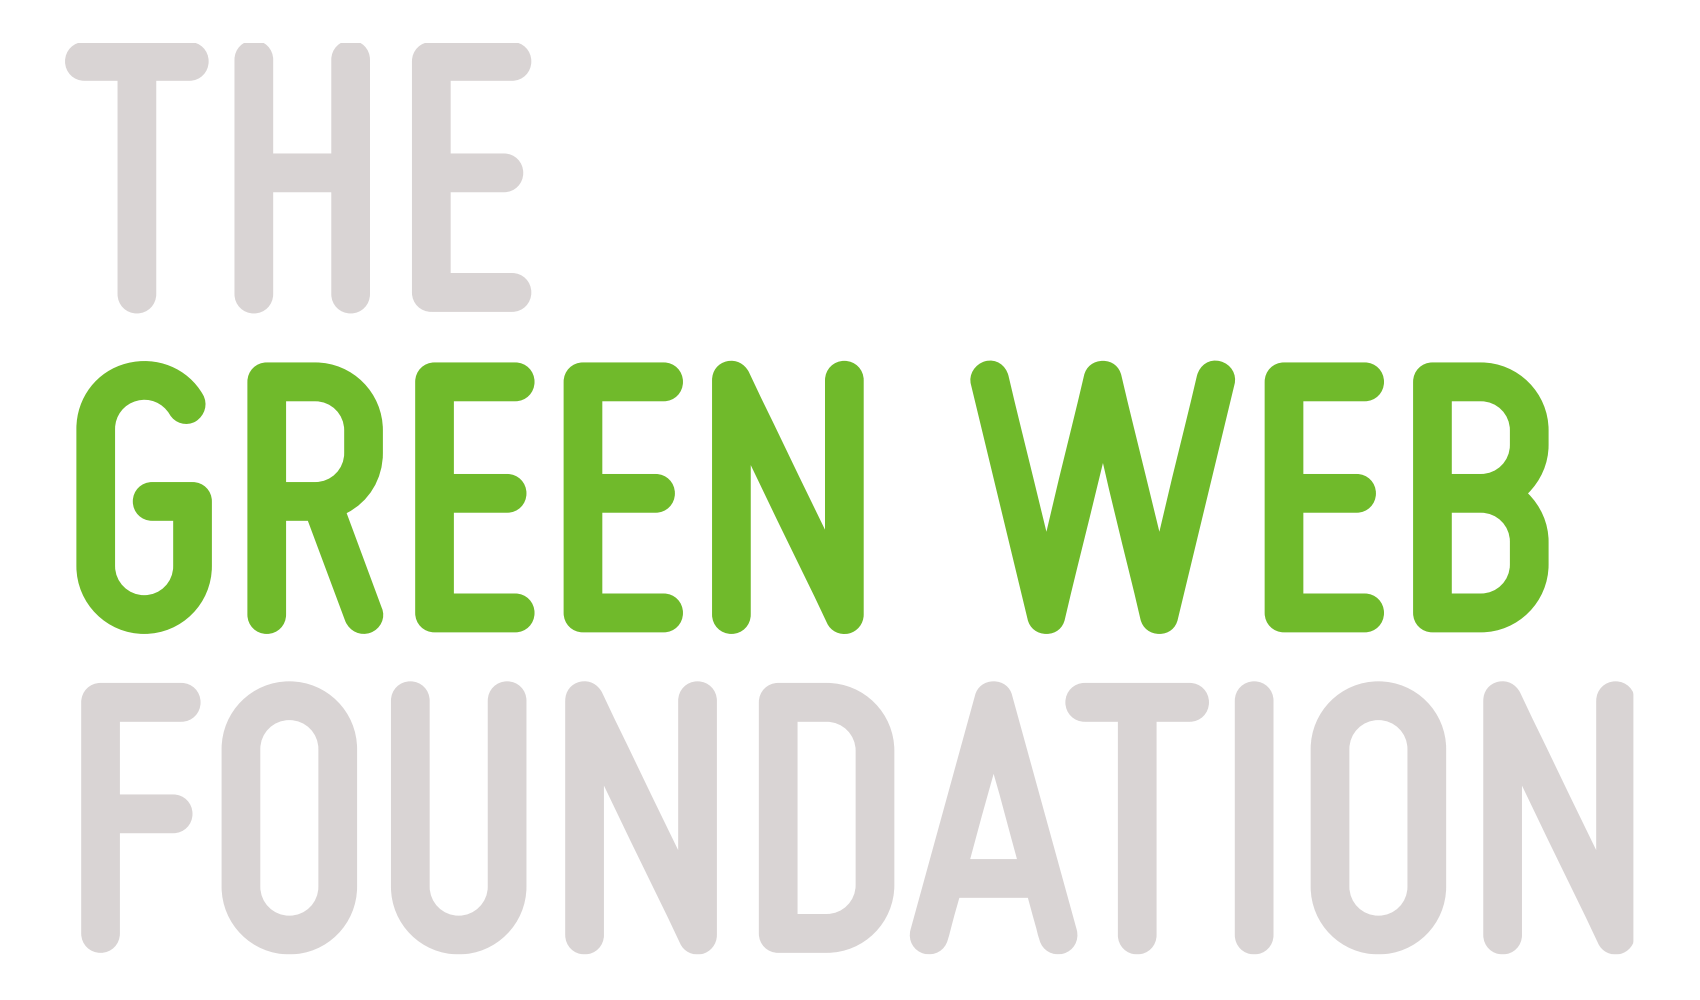 The Green Web Foundation